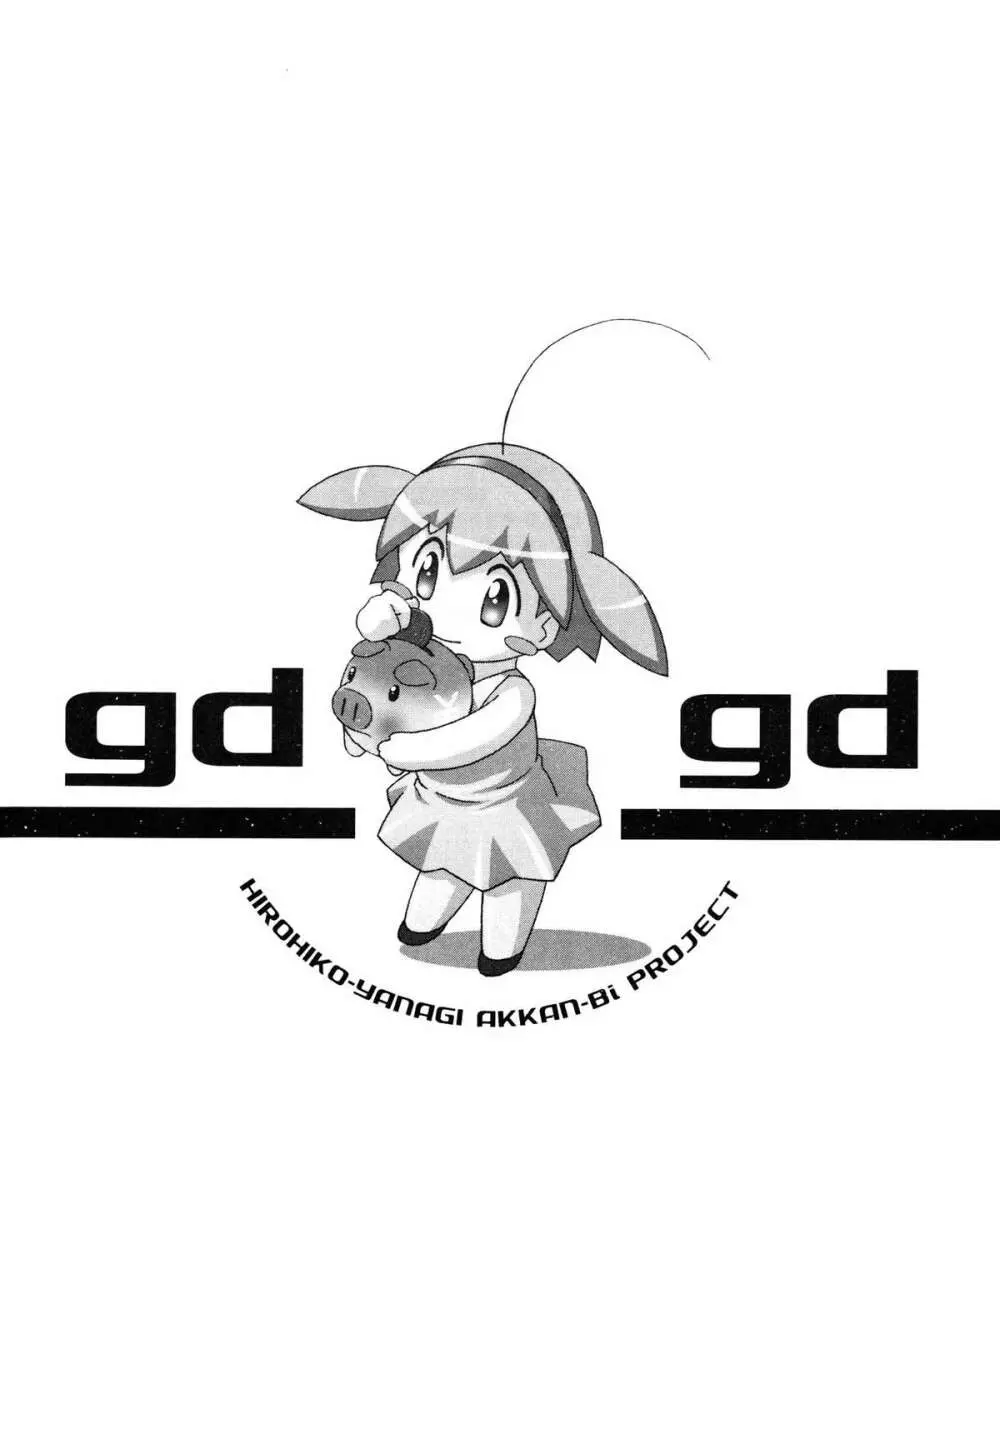 gdgd 12ページ